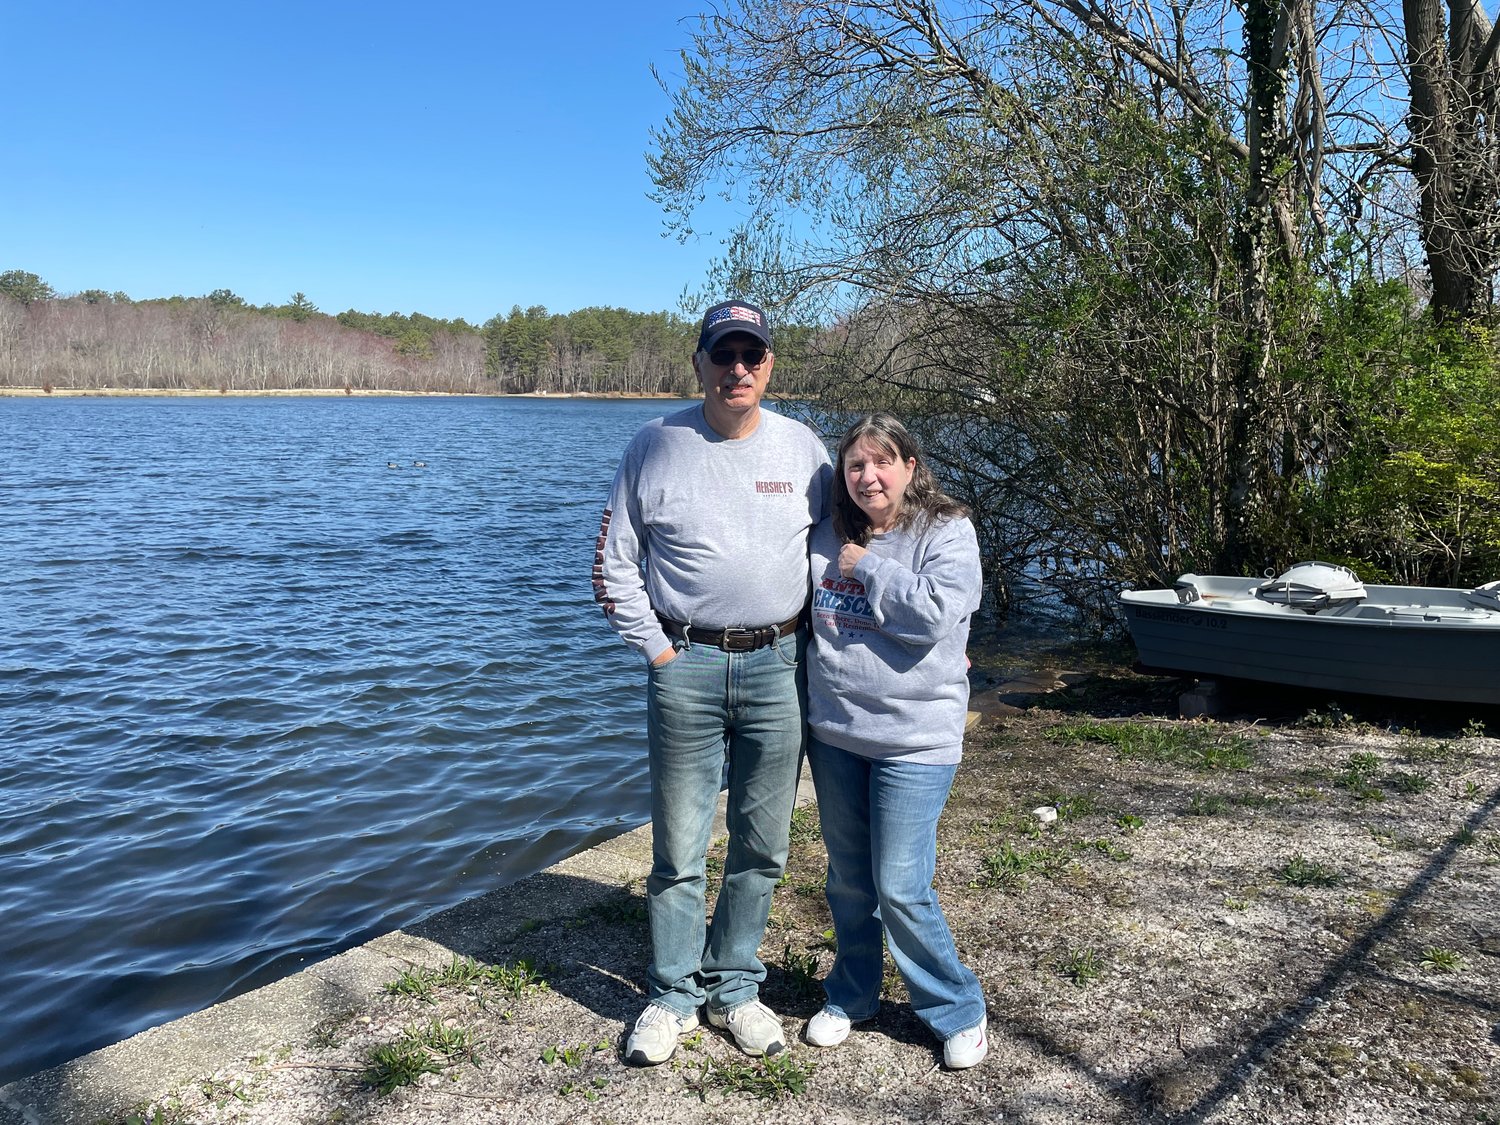 Canaan Lake resident Ray Crescenzi and his wife Teresa have lived on the lake since 1995. When the lake was drained, cleaned and refilled, unfortunately the native fish disappeared. This May, they plan to restock the largemouth bass.